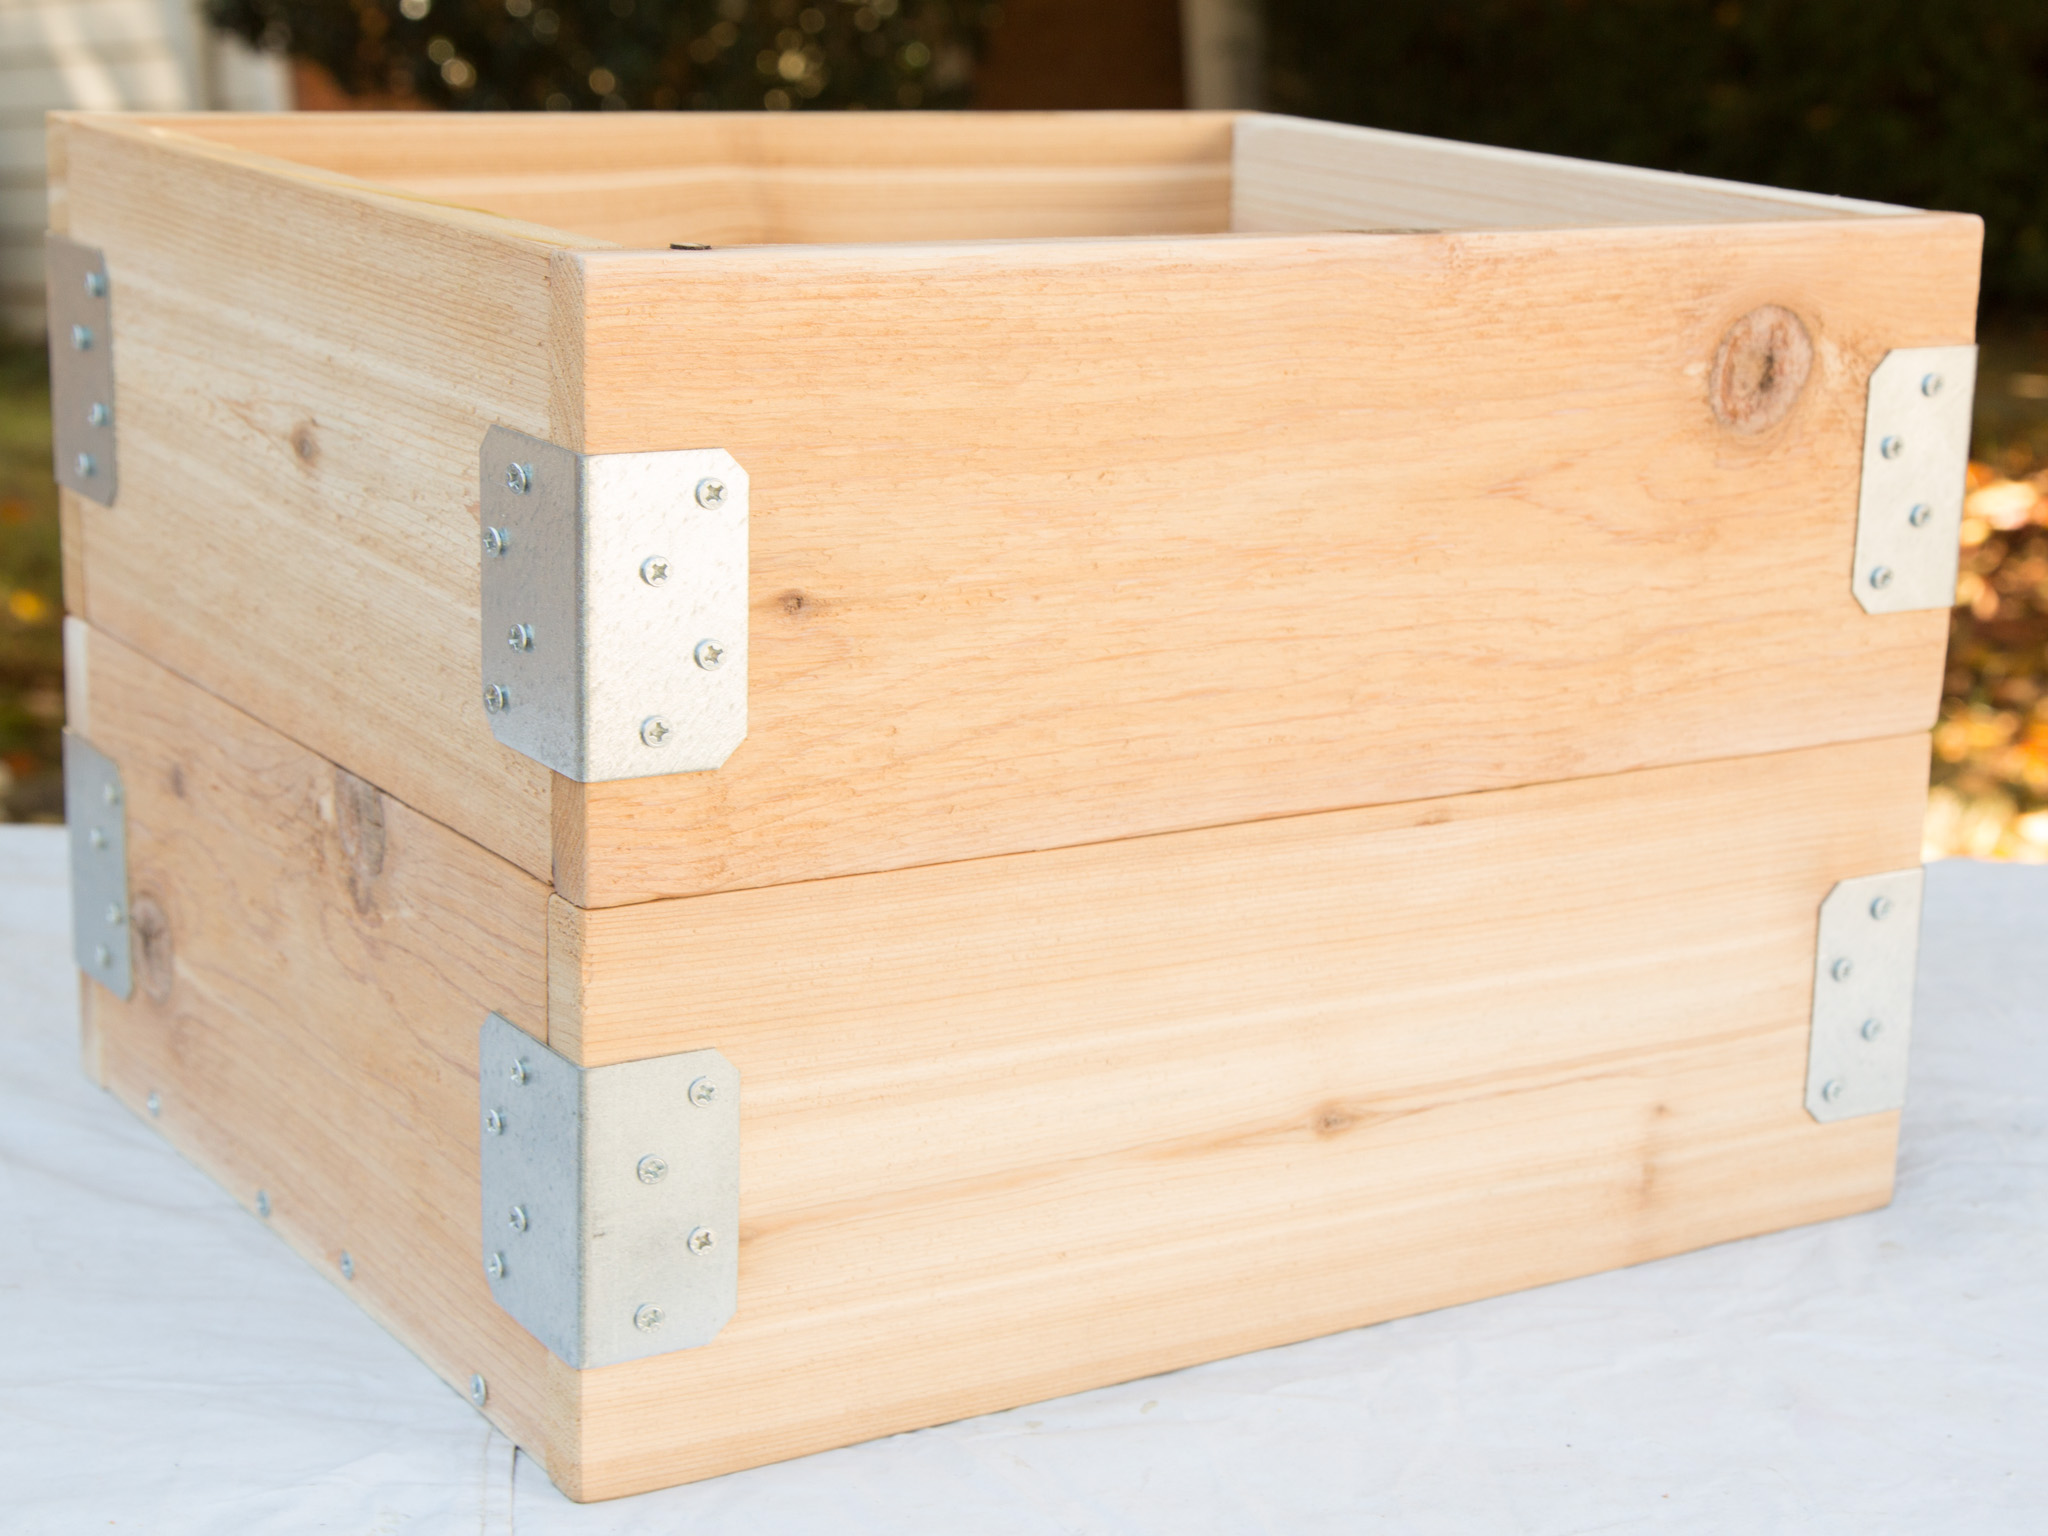 Wooden Boxes New Fruit Crates Solid Sturdy Wooden Boxes Wine Boxes 